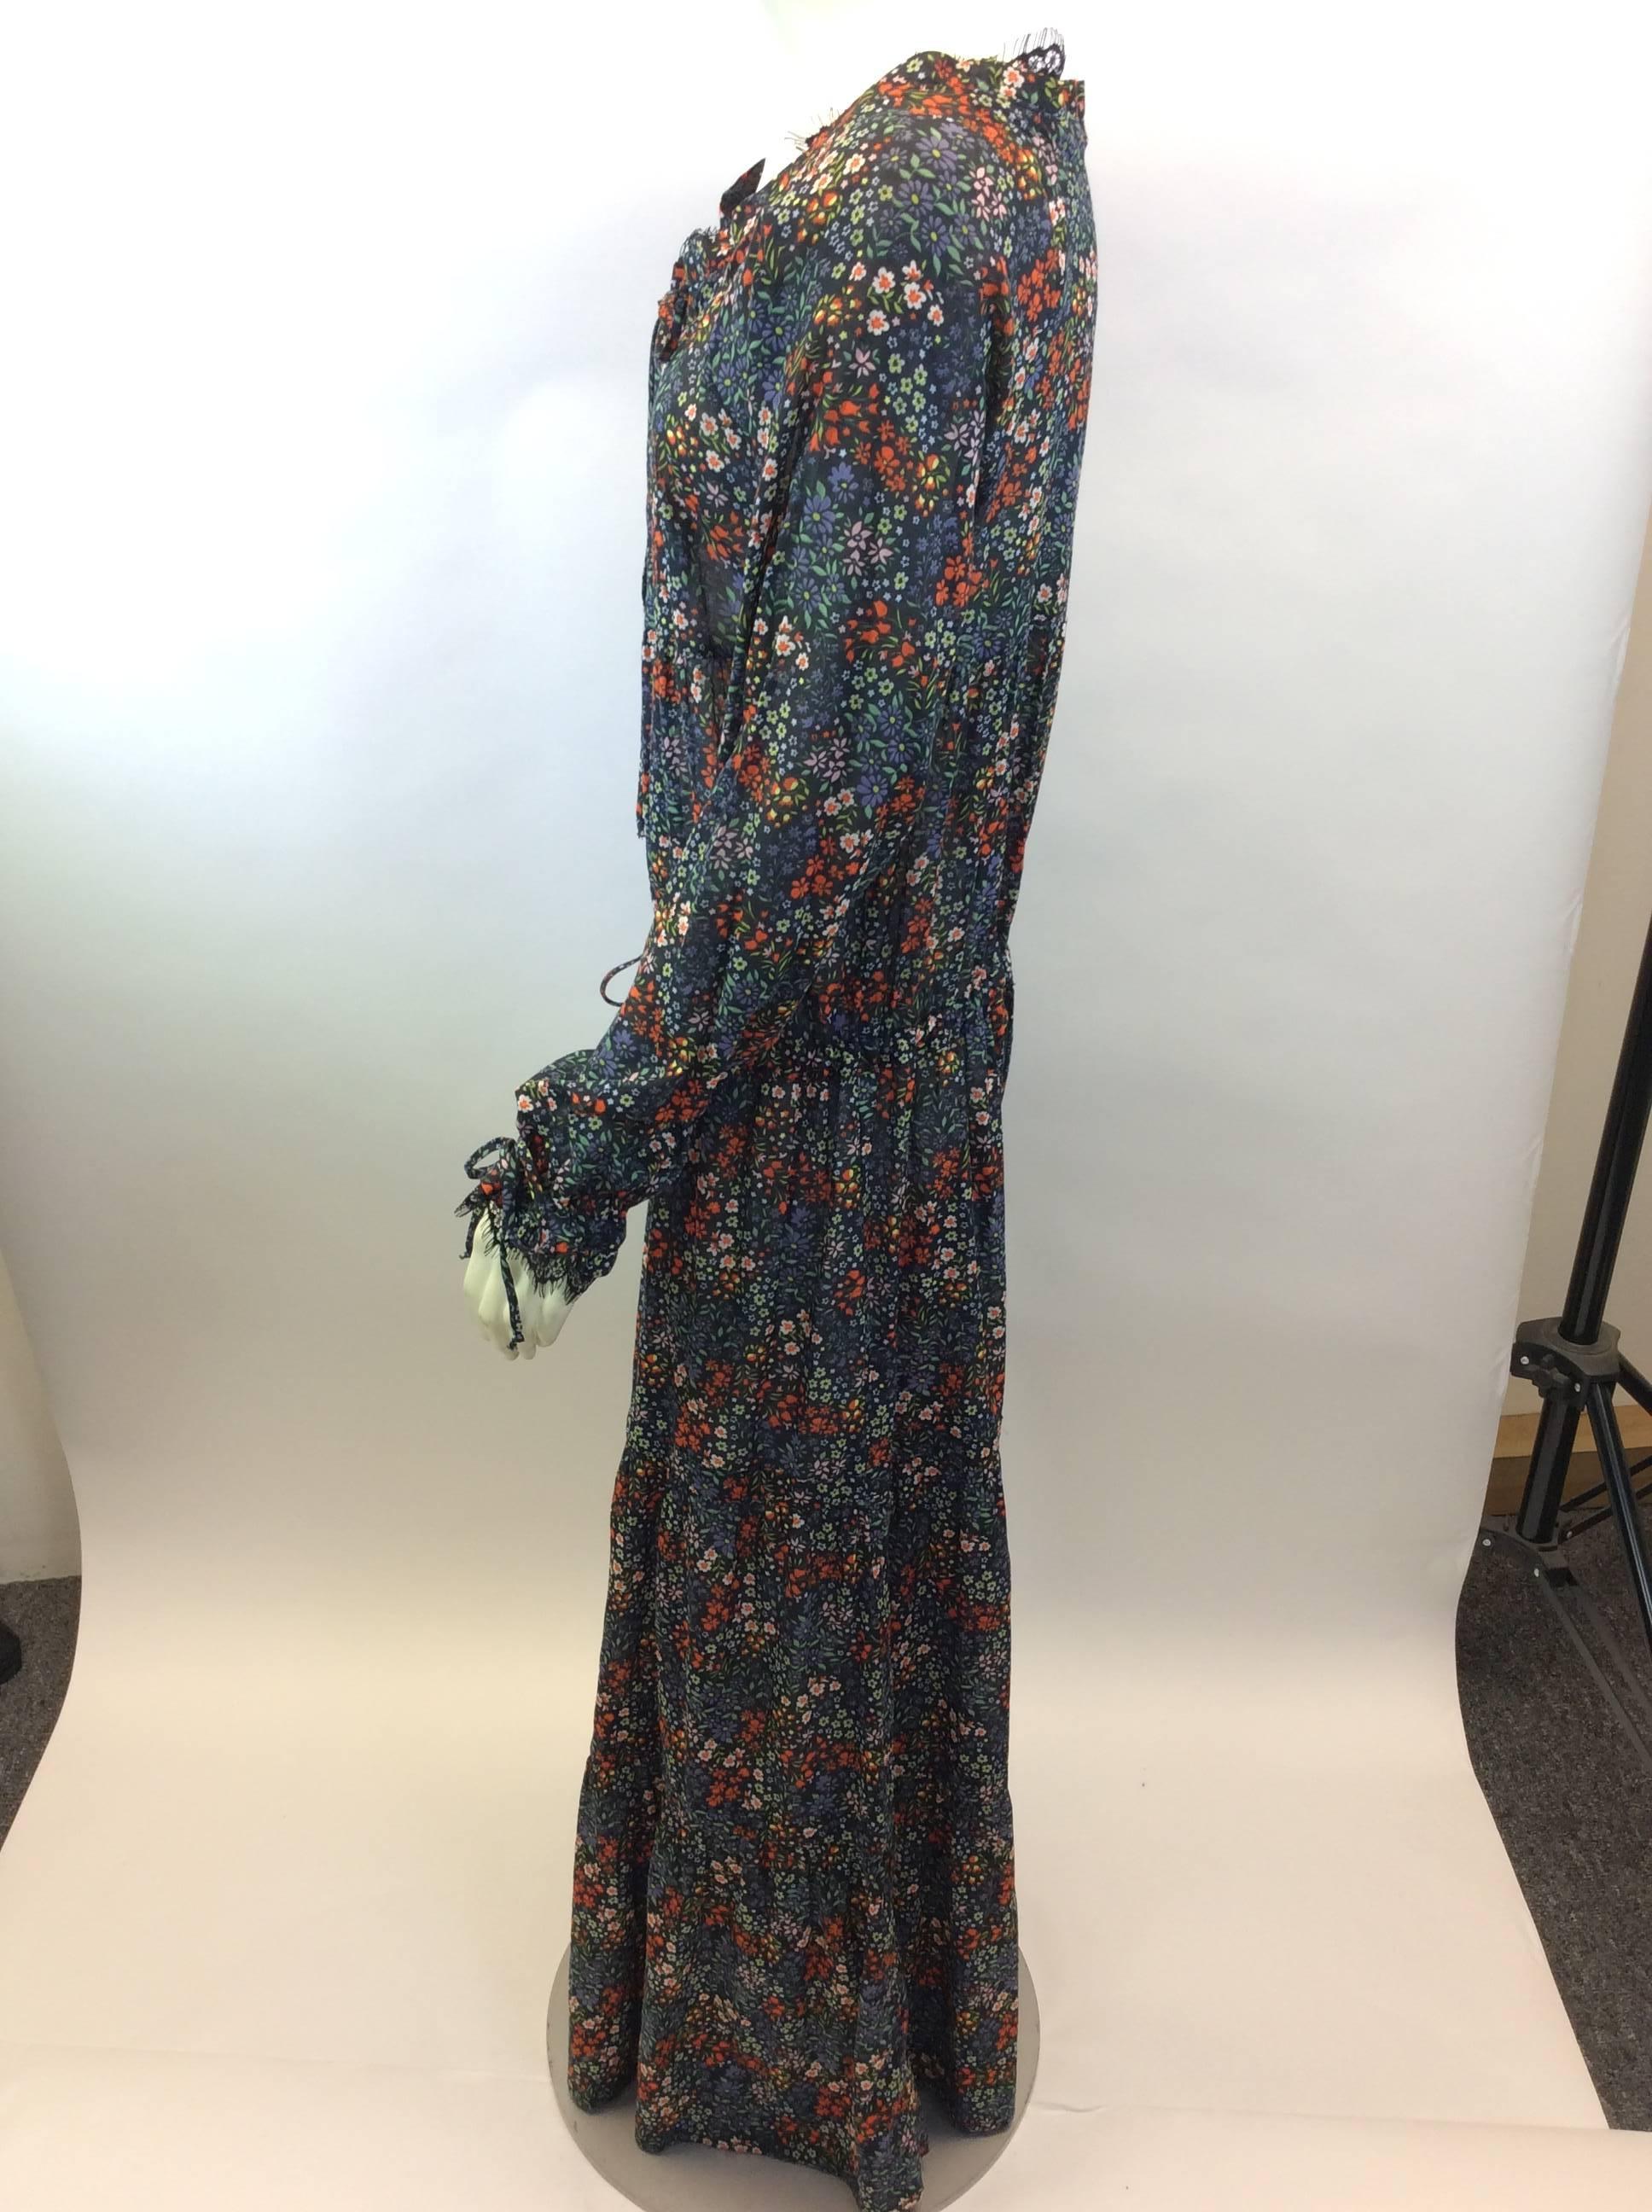 Warm Floral Cotton Jumpsuit With Lace Detail NWT
$187
100% Cotton
Size Small
Length 57